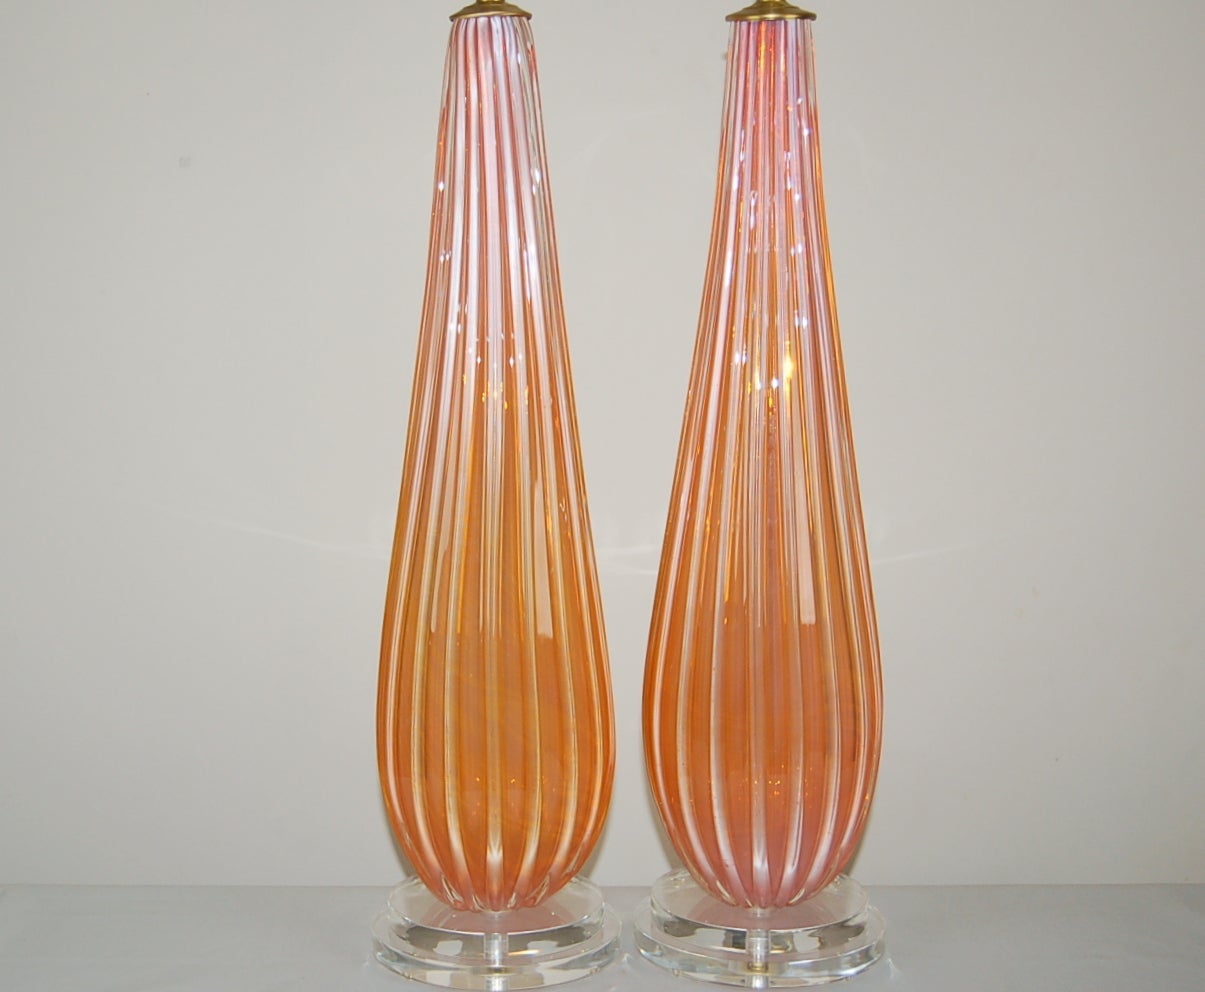 Italian Matched Pair of Vintage Murano Glass Lamps by Archimede Seguso in Melon Orange